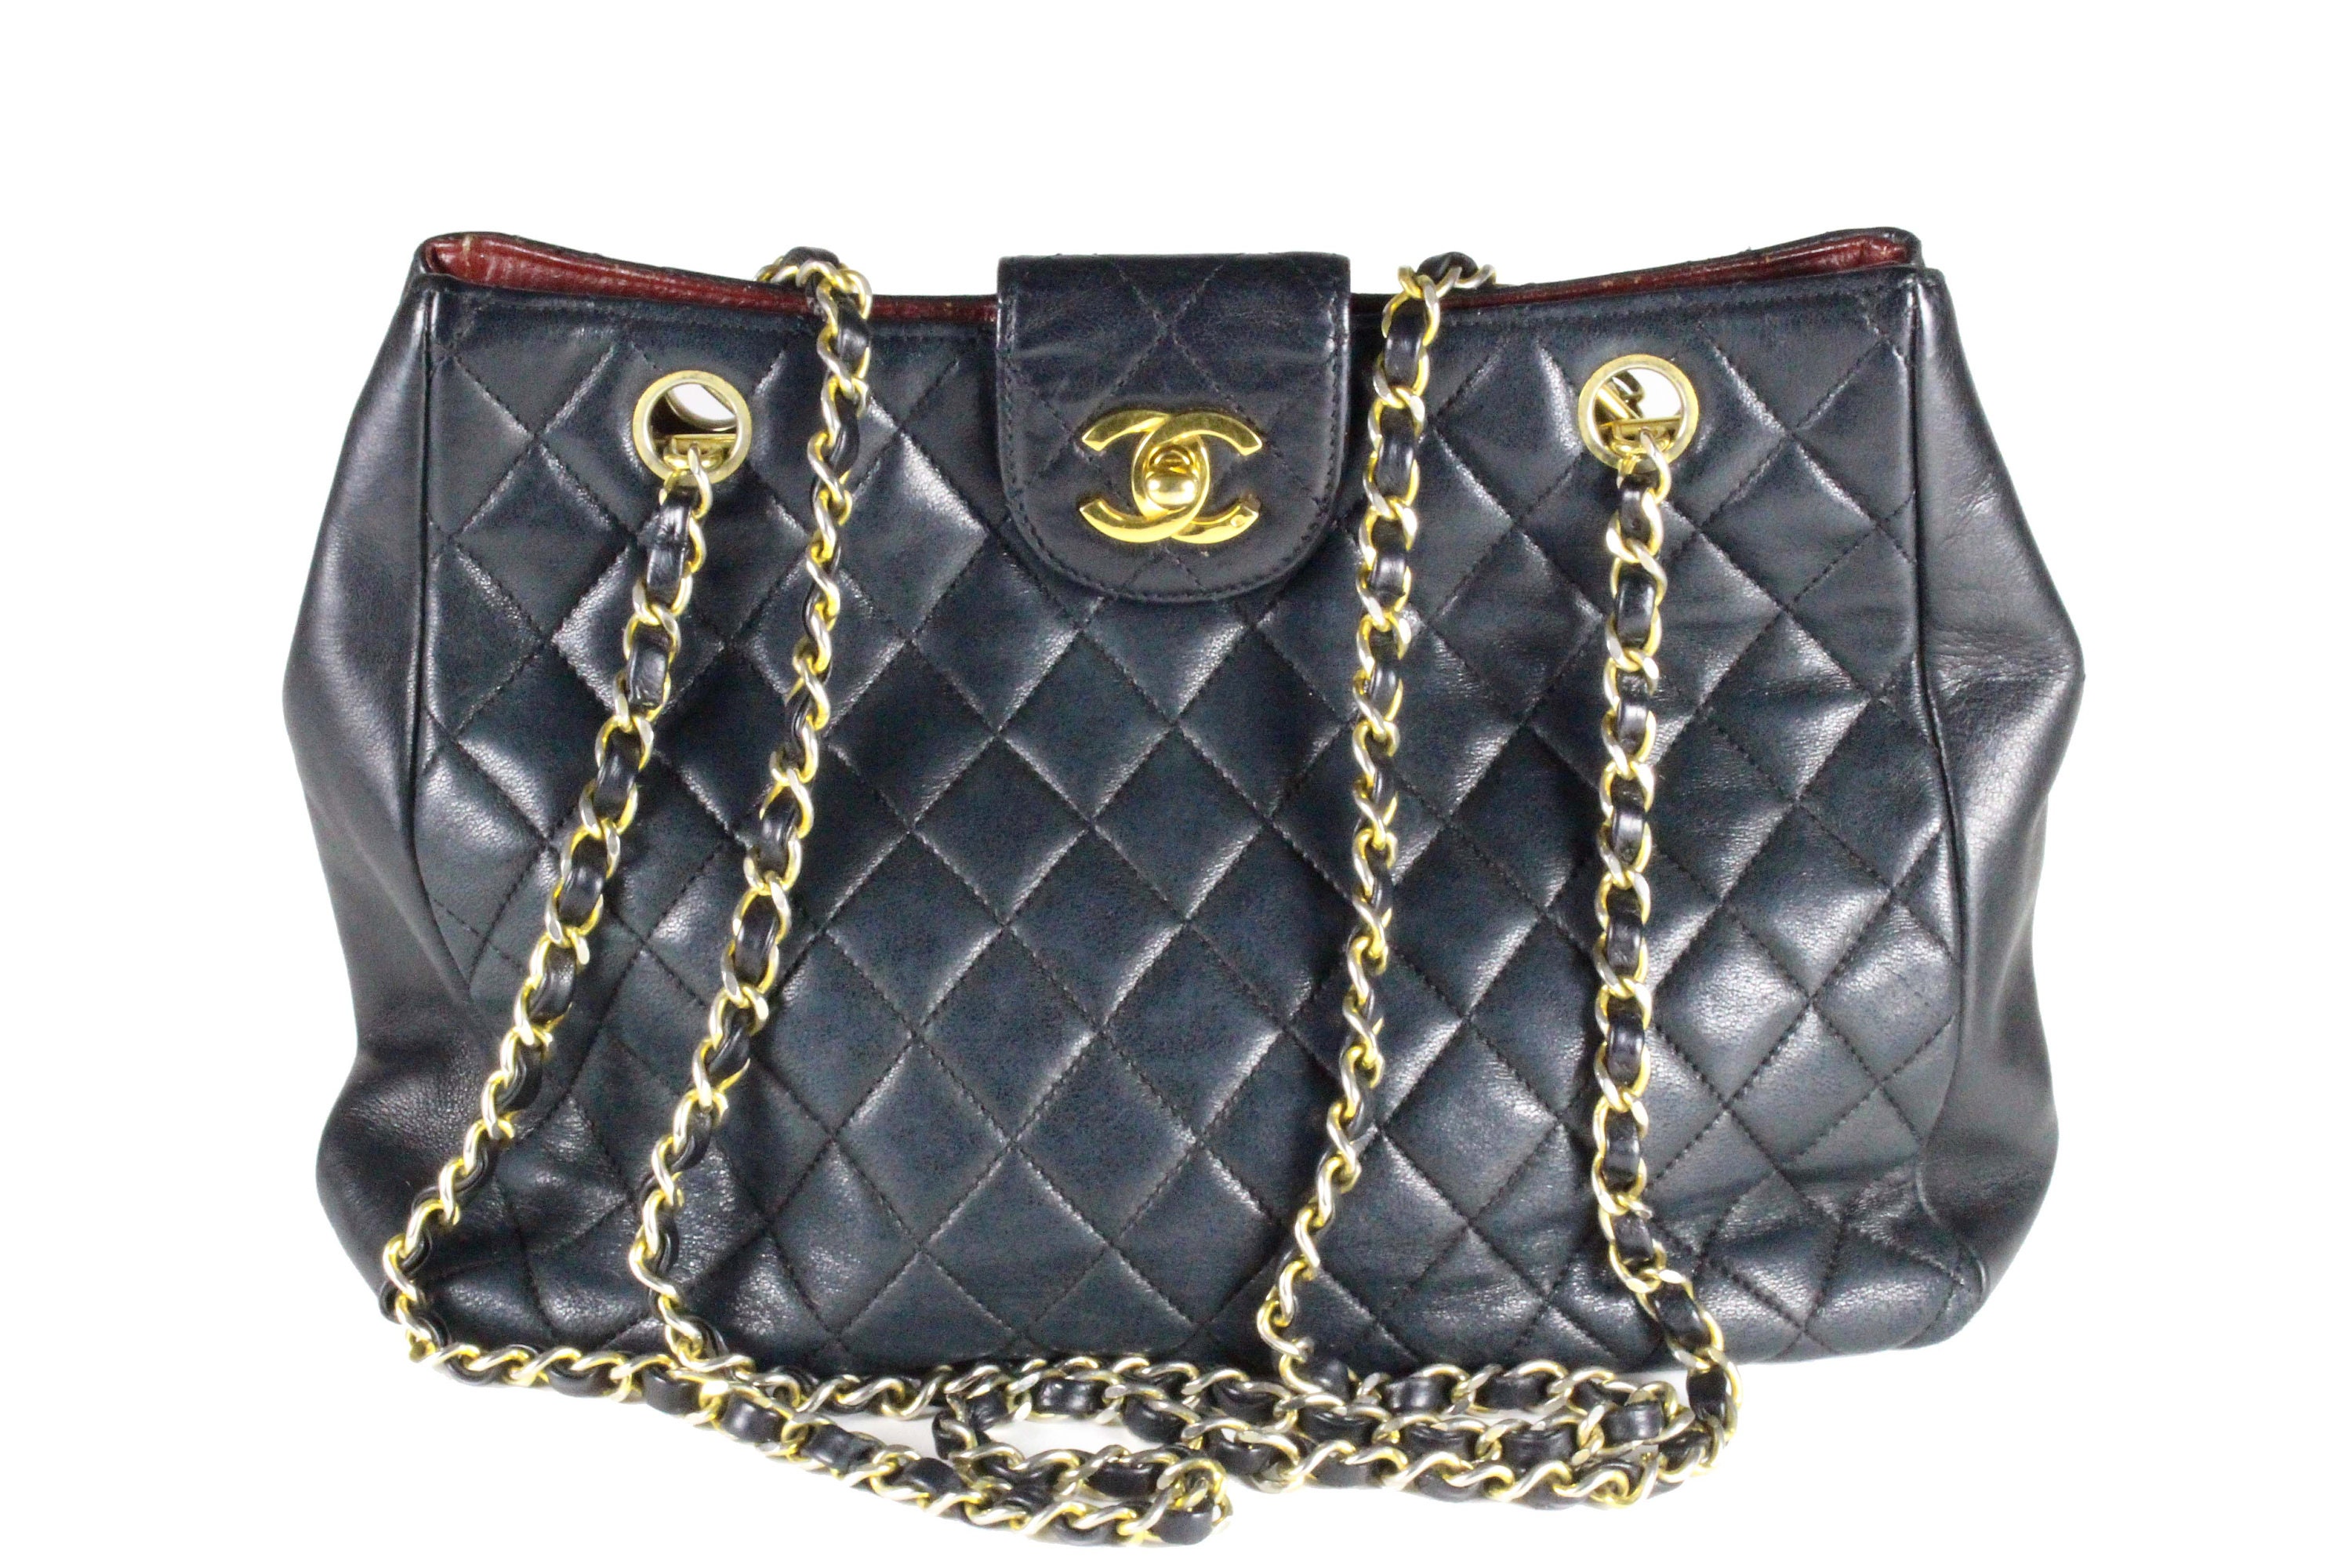 Chanel Vintage Quilted Tote, $4,778, farfetch.com